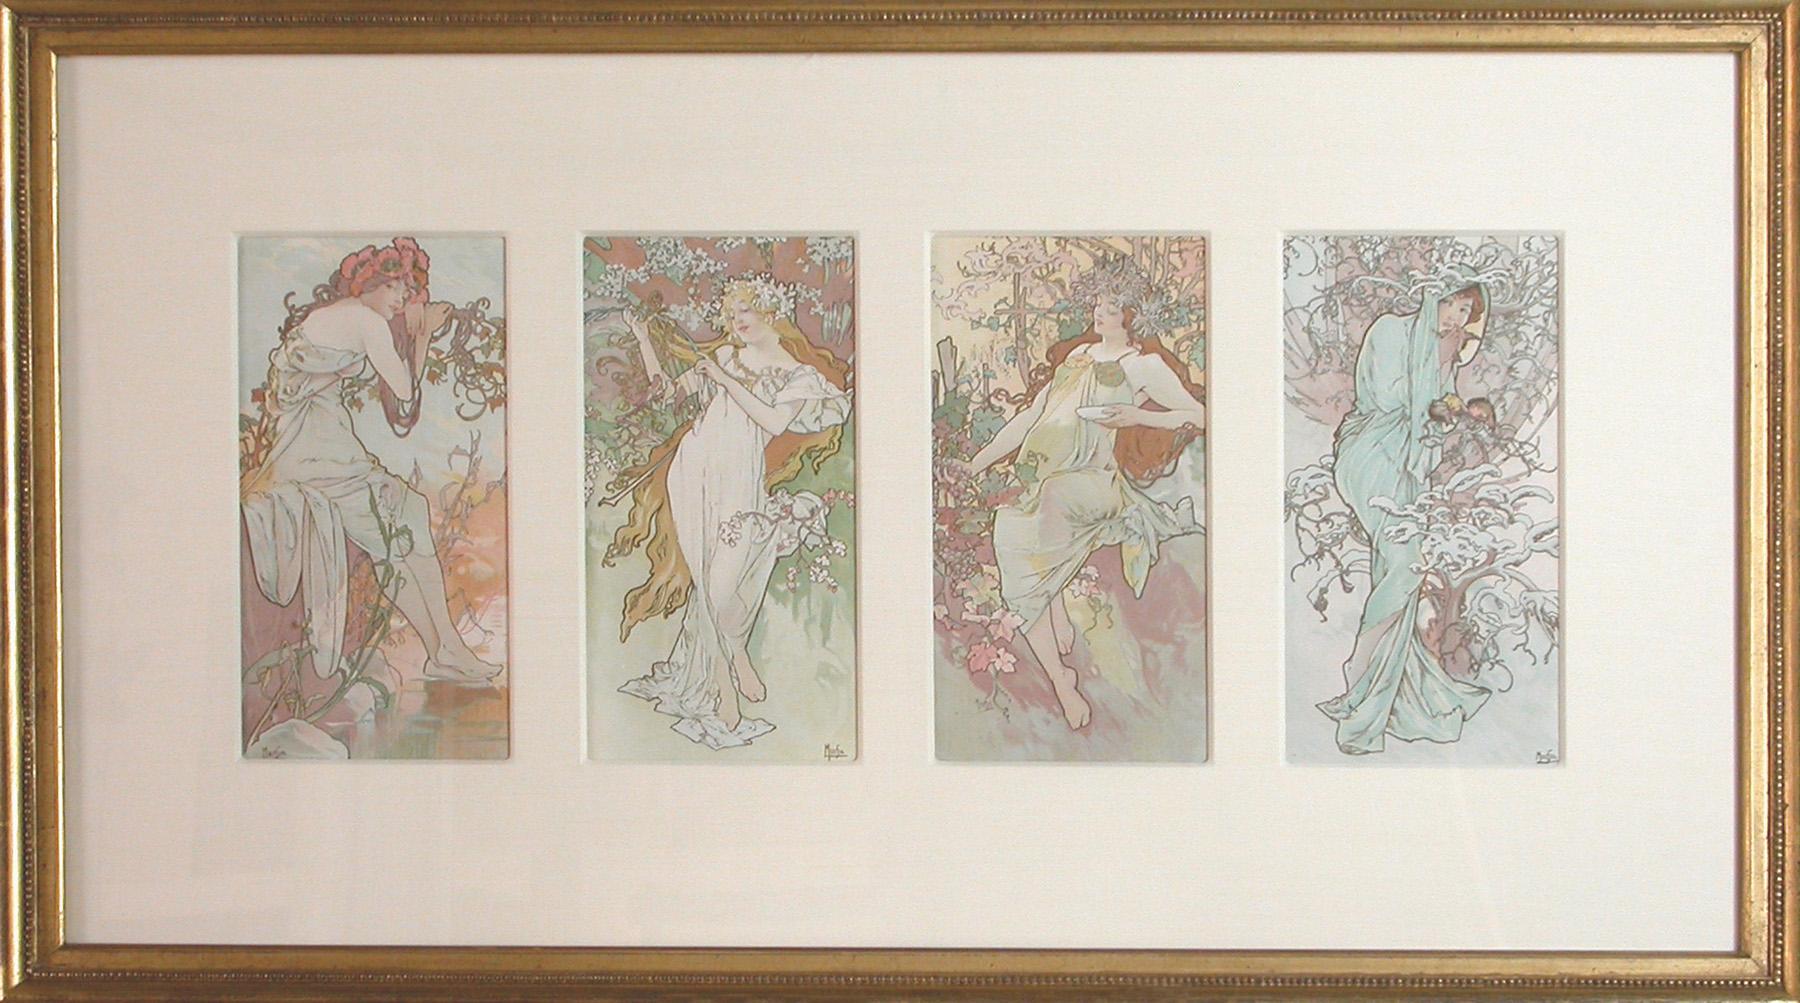 This is Mucha’s first set of decorative panels printed in 1896 and one of his most endearing.  Mucha breathed new life into the classic theme of personifying seasons; each highly-stylized Art Nouveau panel depicting a beautiful young lady set in a